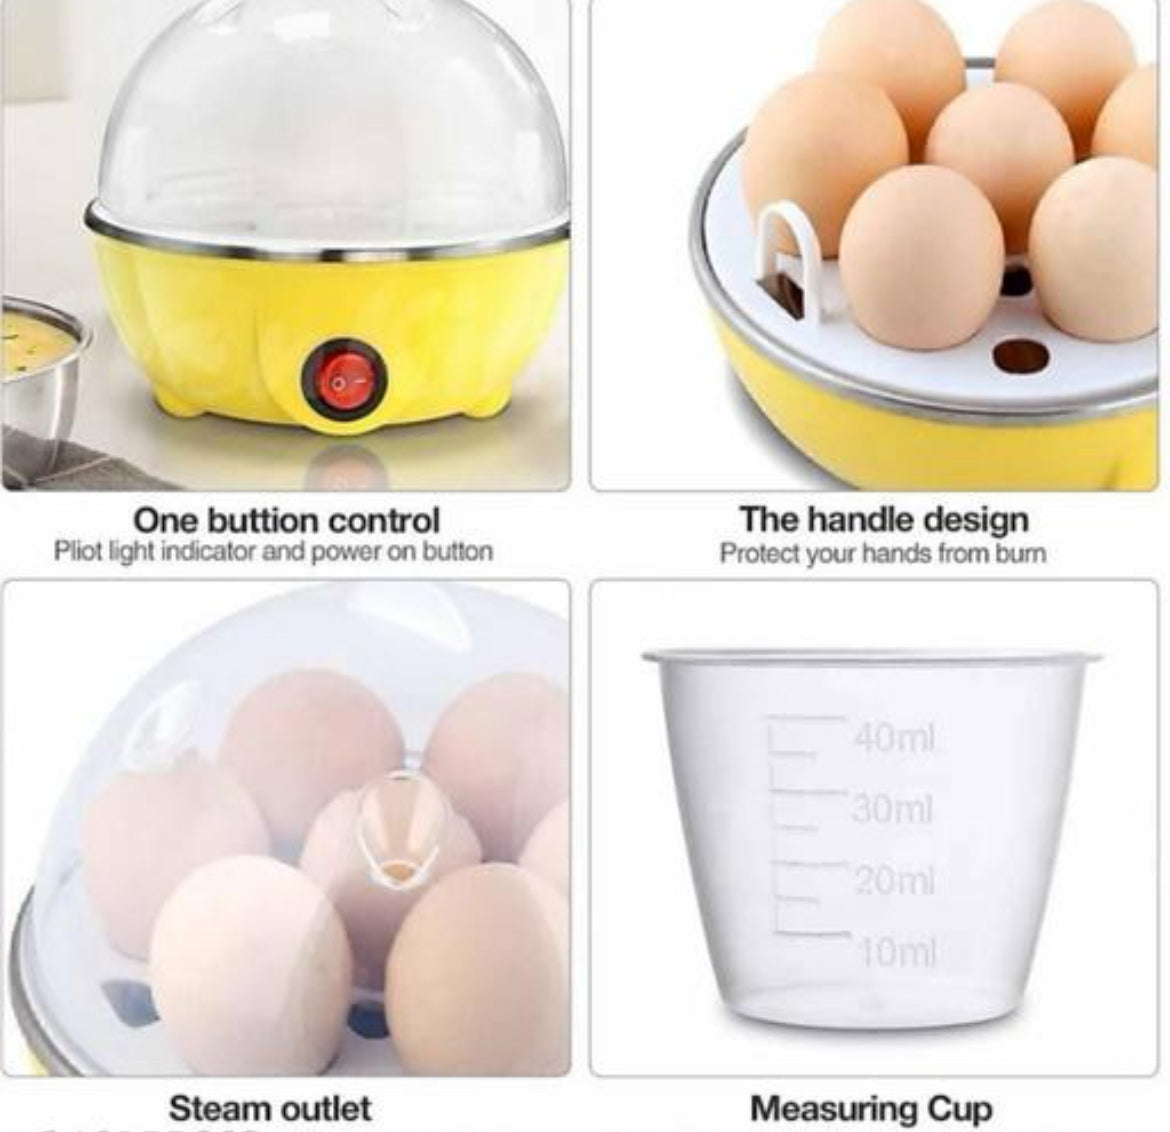 Effortless Egg Cooking: Automatic Electric Egg Boiler